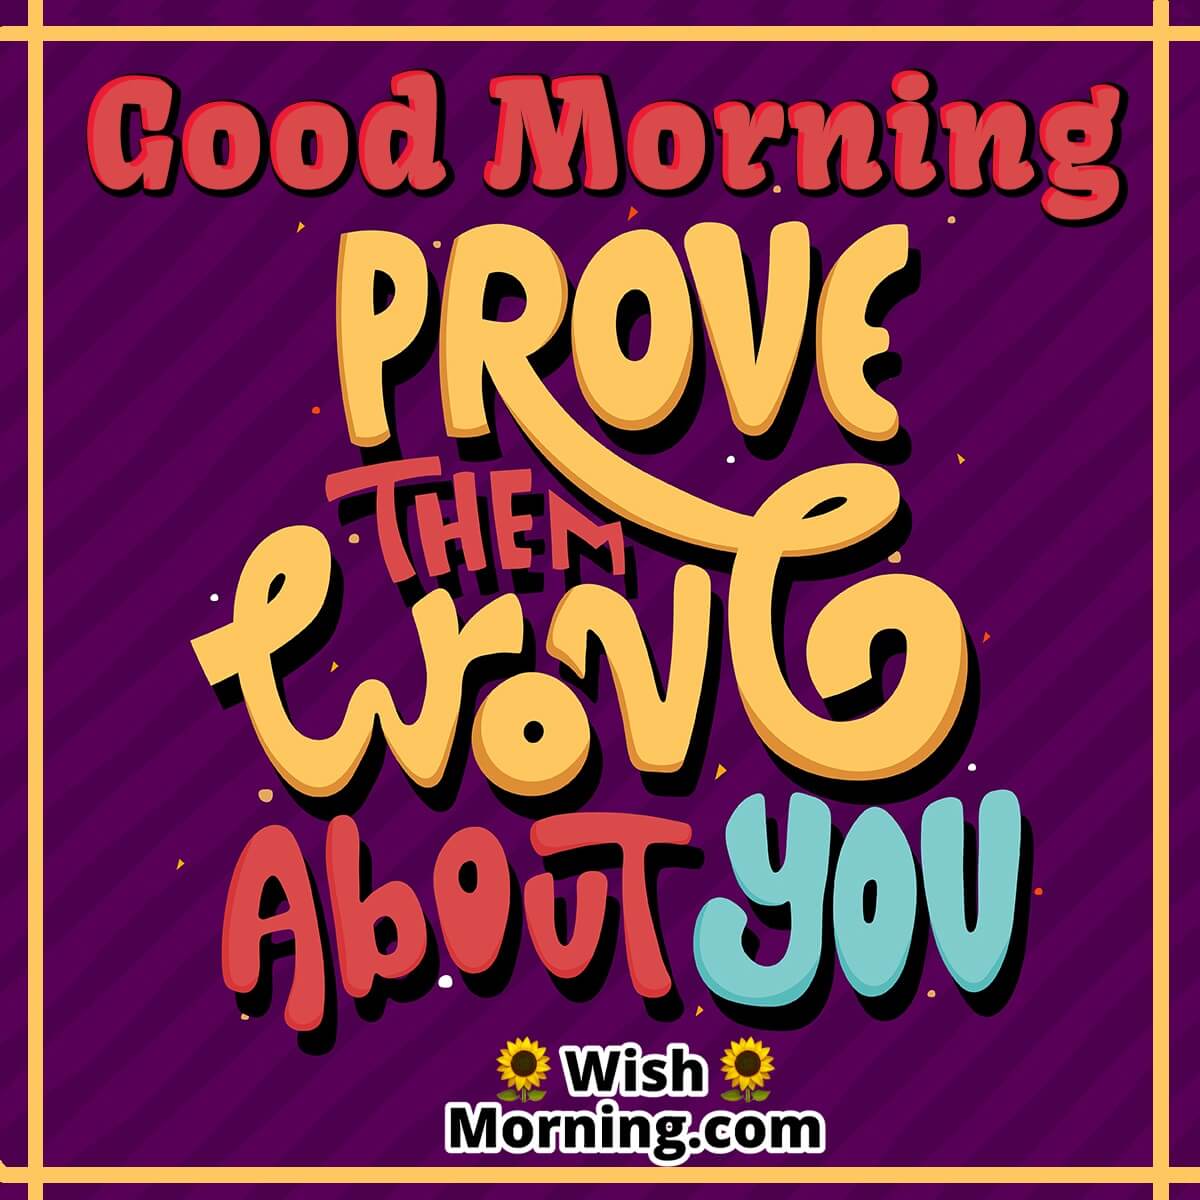 Good Morning Prove Them Wrong About You